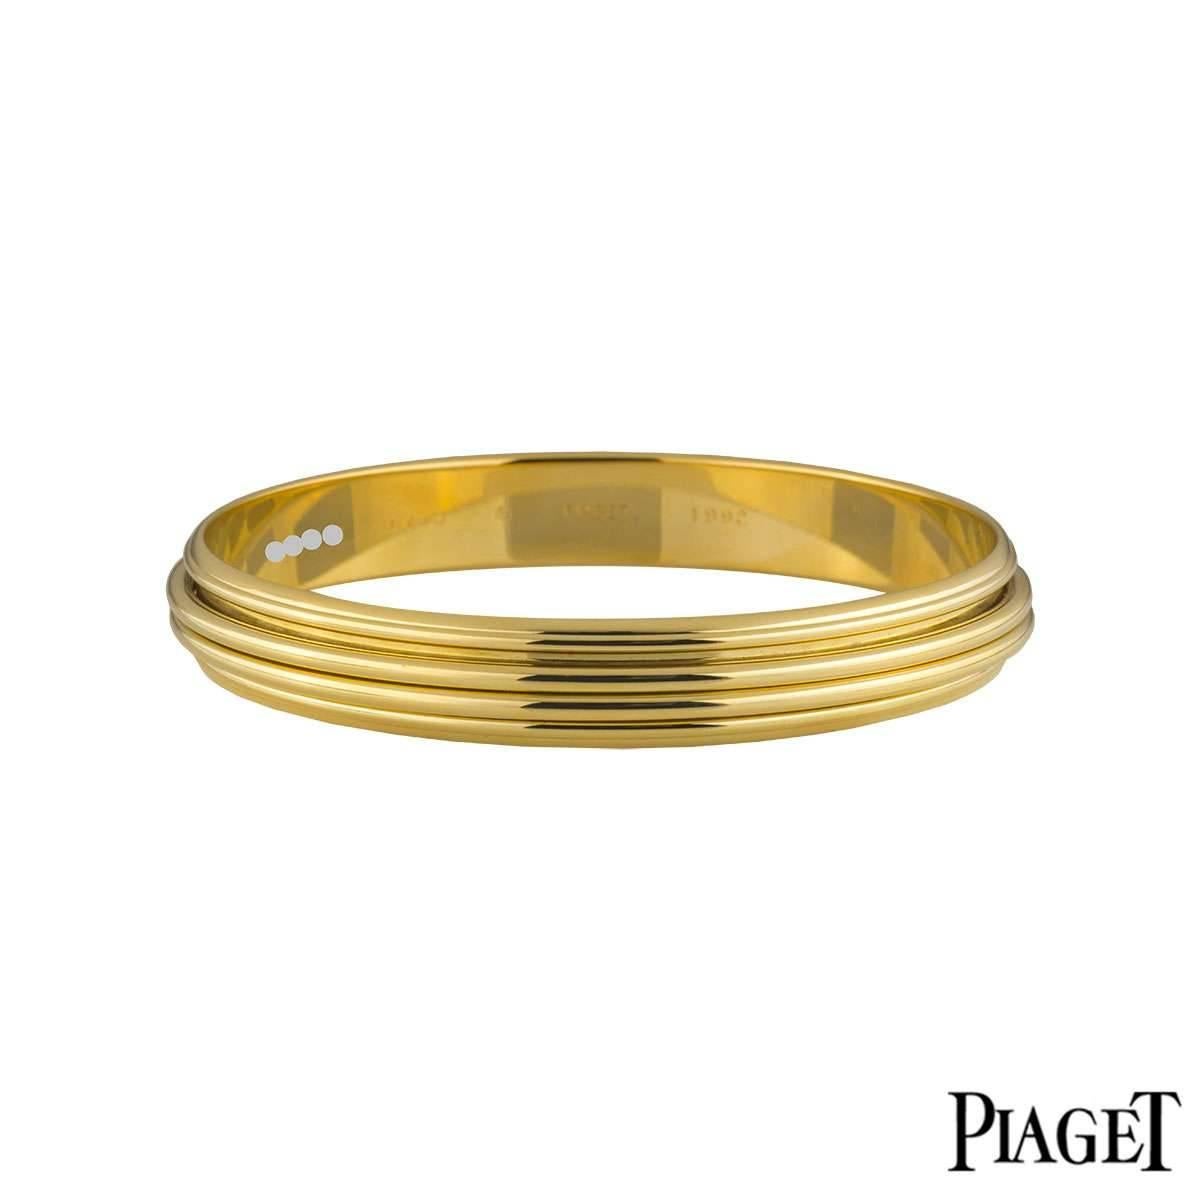 An 18k yellow gold bangle from the Possession collection by Piaget. The bangle has fluted boarders containing 2 spinning gold rings in the centre. The bangle measures 11mm in width and is 8.25 inches in circumference. The bangle has a gross weight